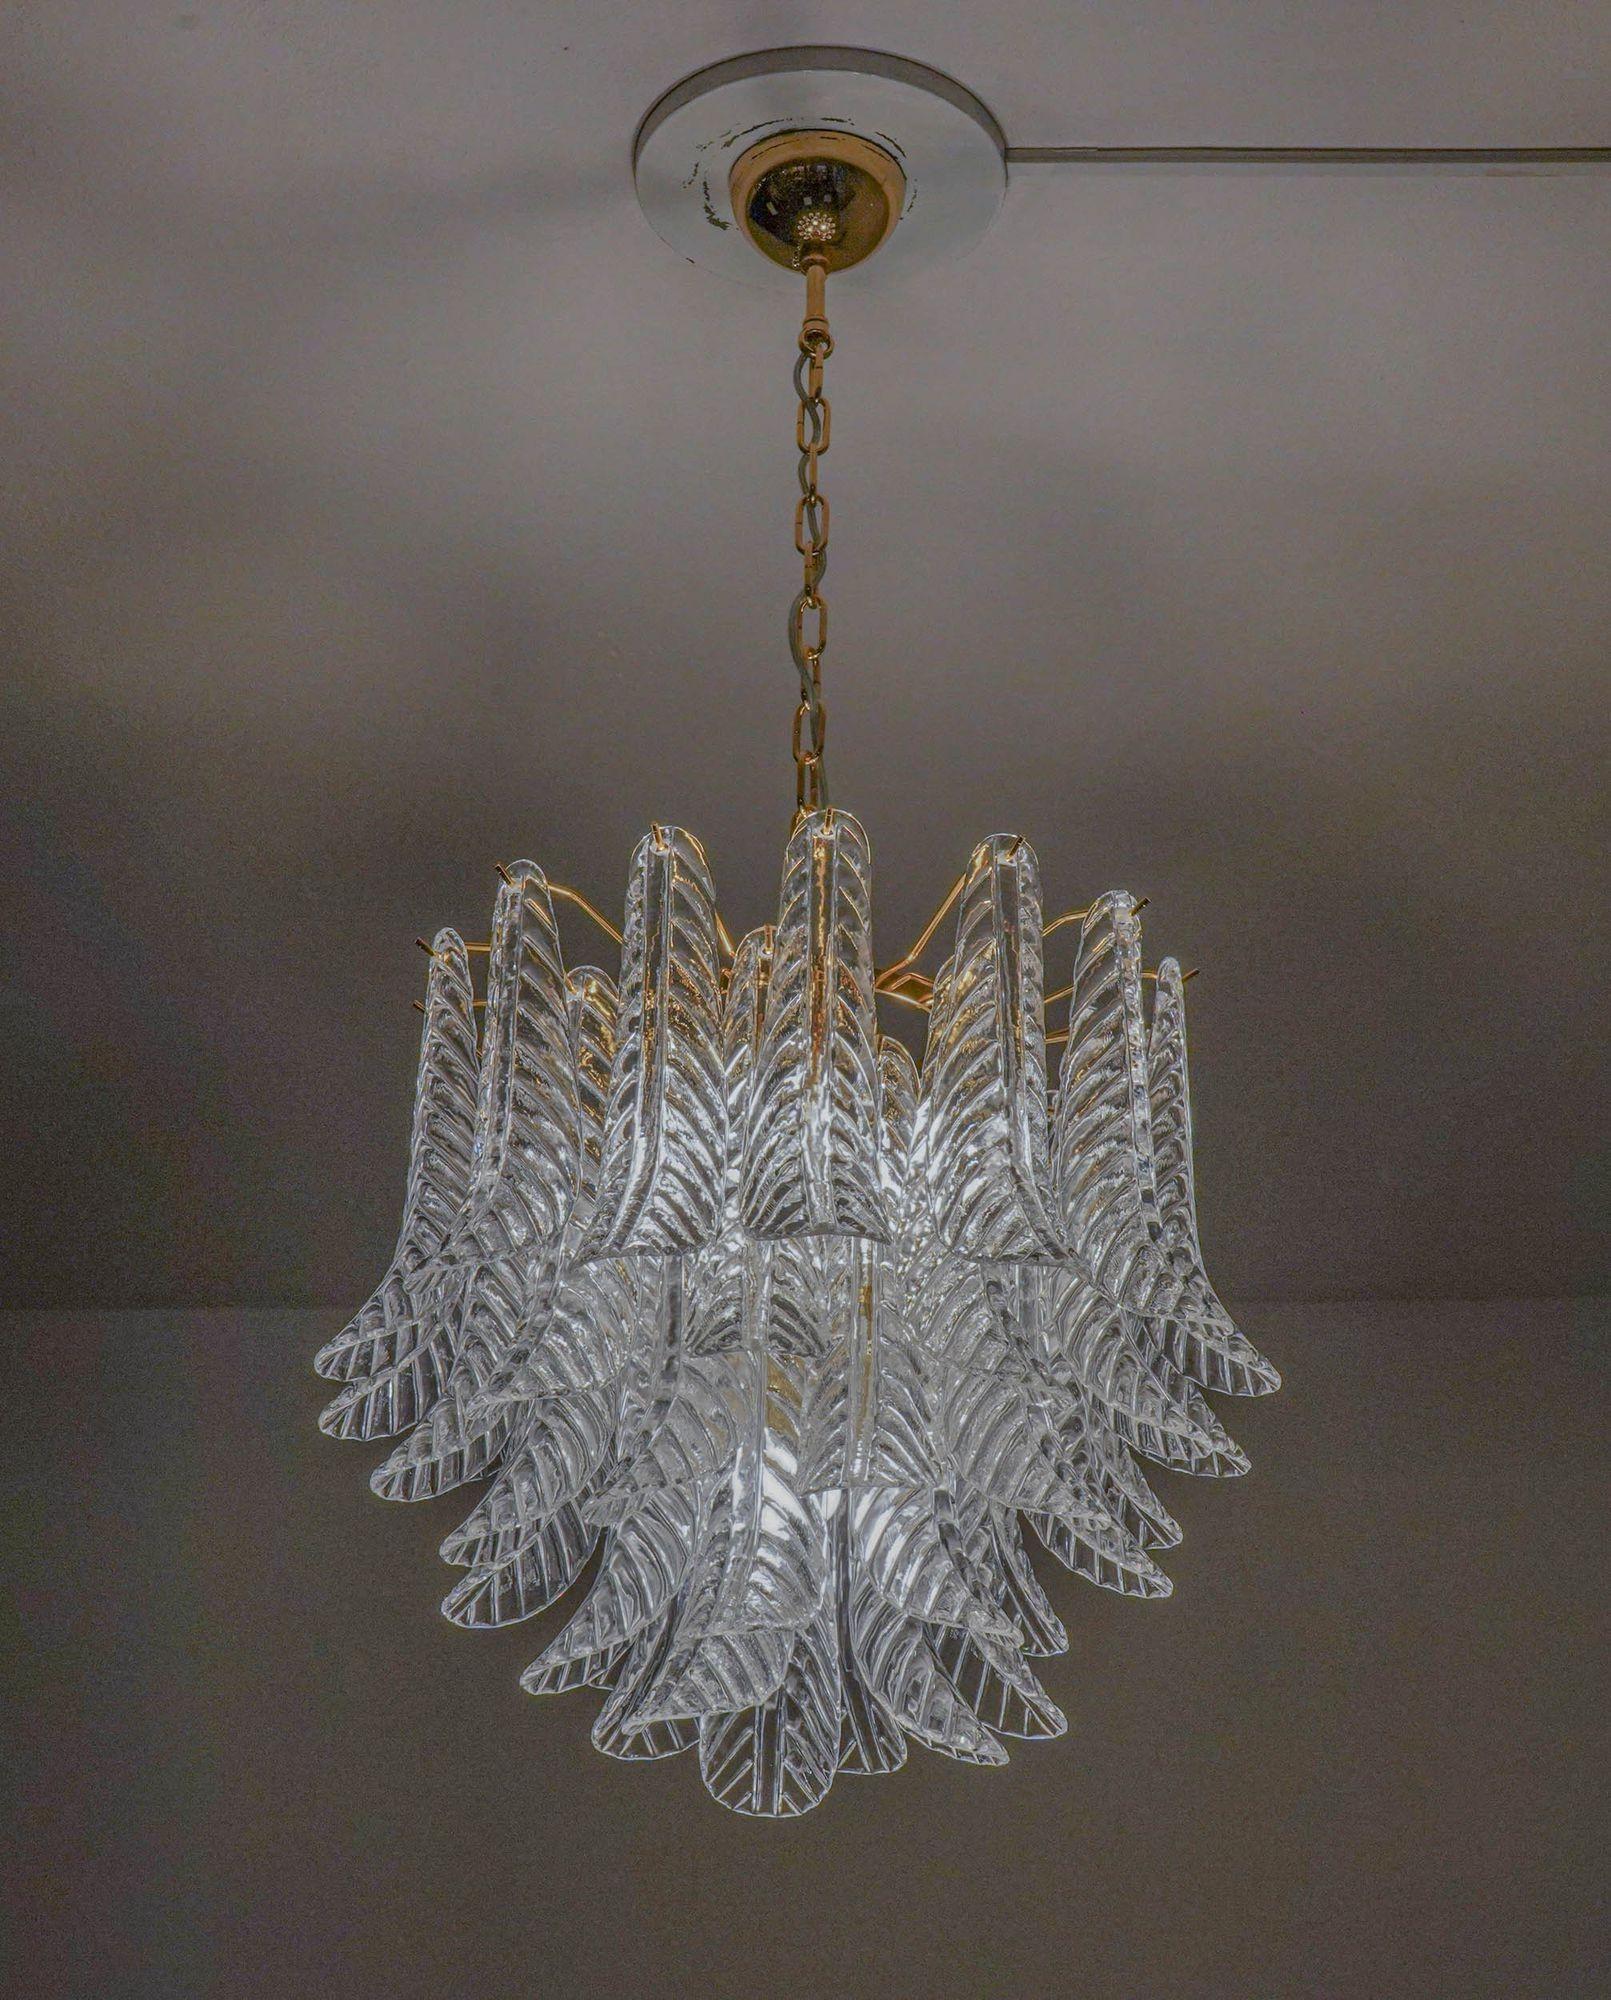 This superb classic reliable style was re-designed for an improved look and trouble free chandelier.

This listing is for the US wired UL components not listed. For buyers who don't need the UL and are looking for a higher discount. Chandeliers